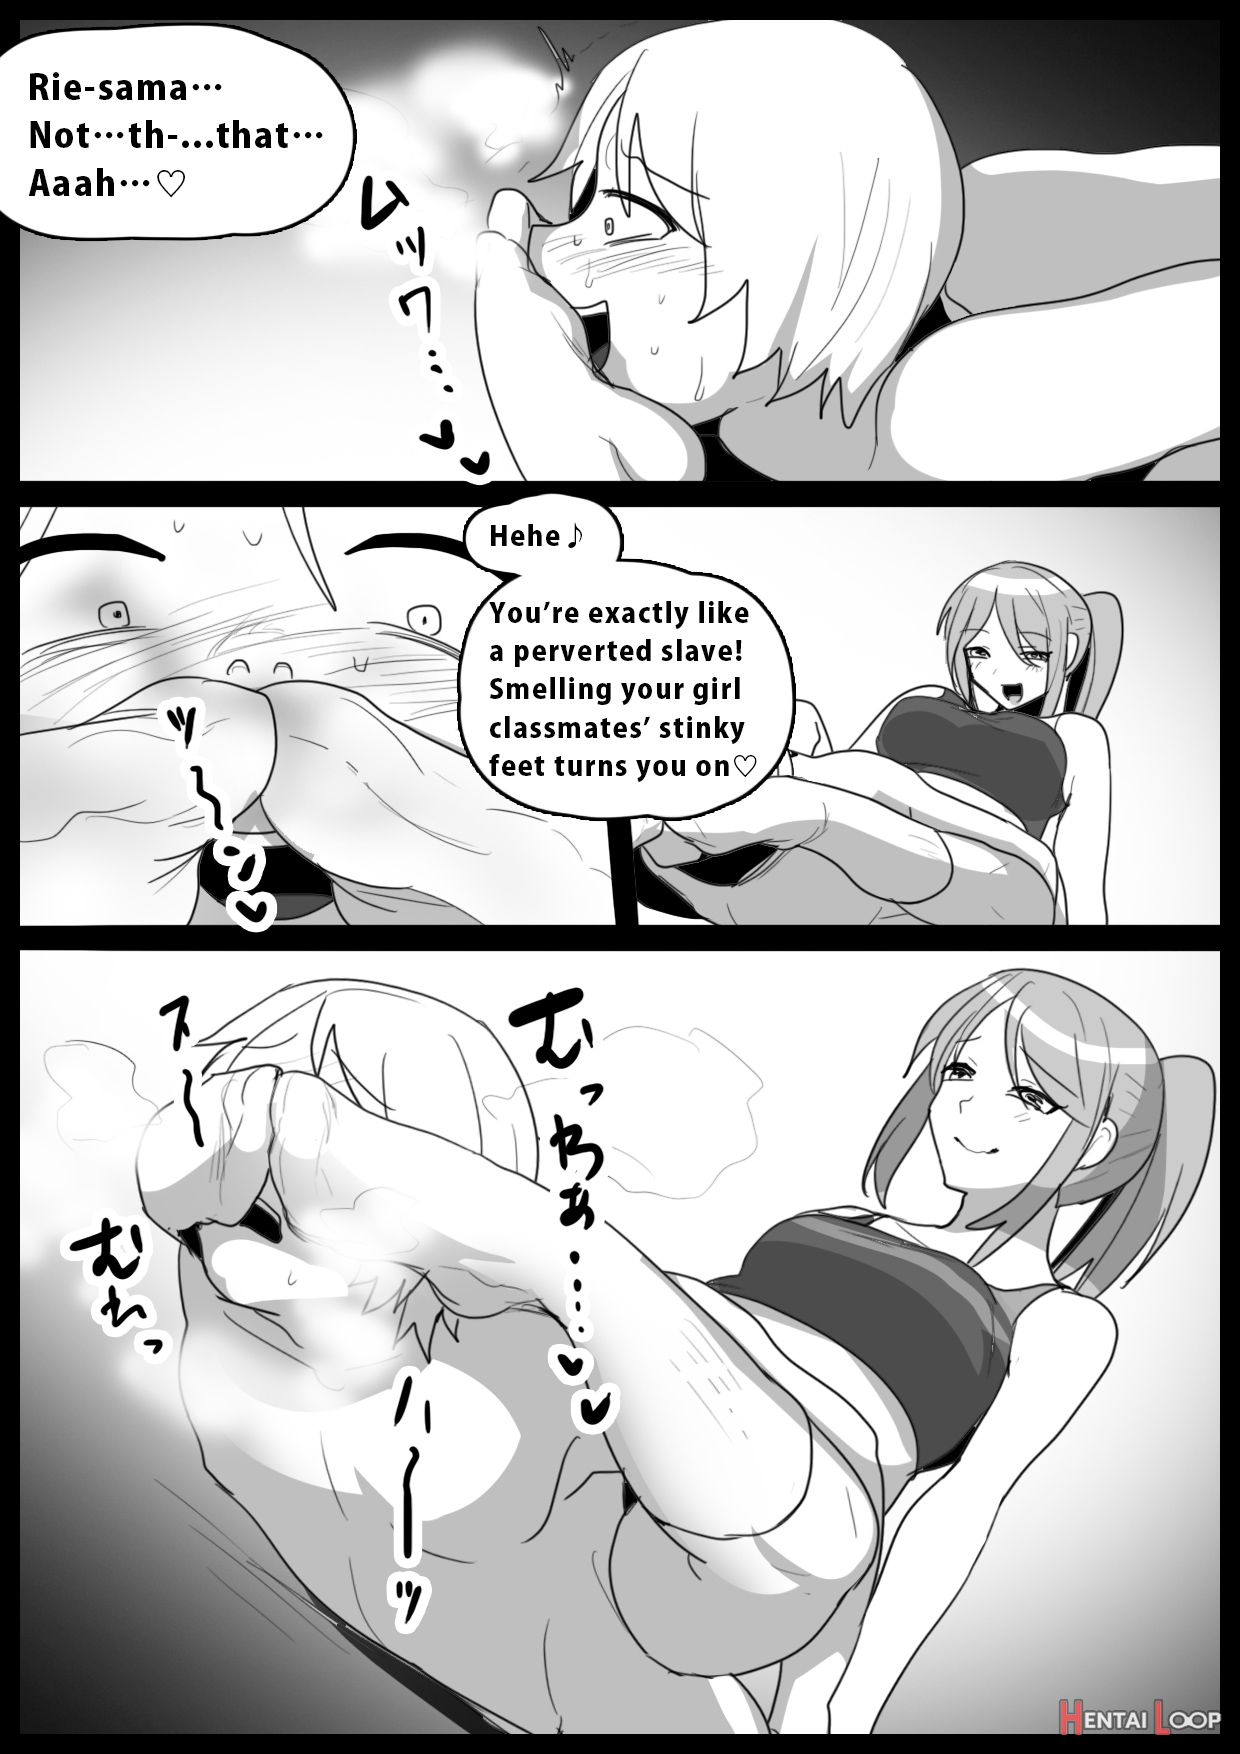 Spin-off Of Girls Beat By Rie page 10